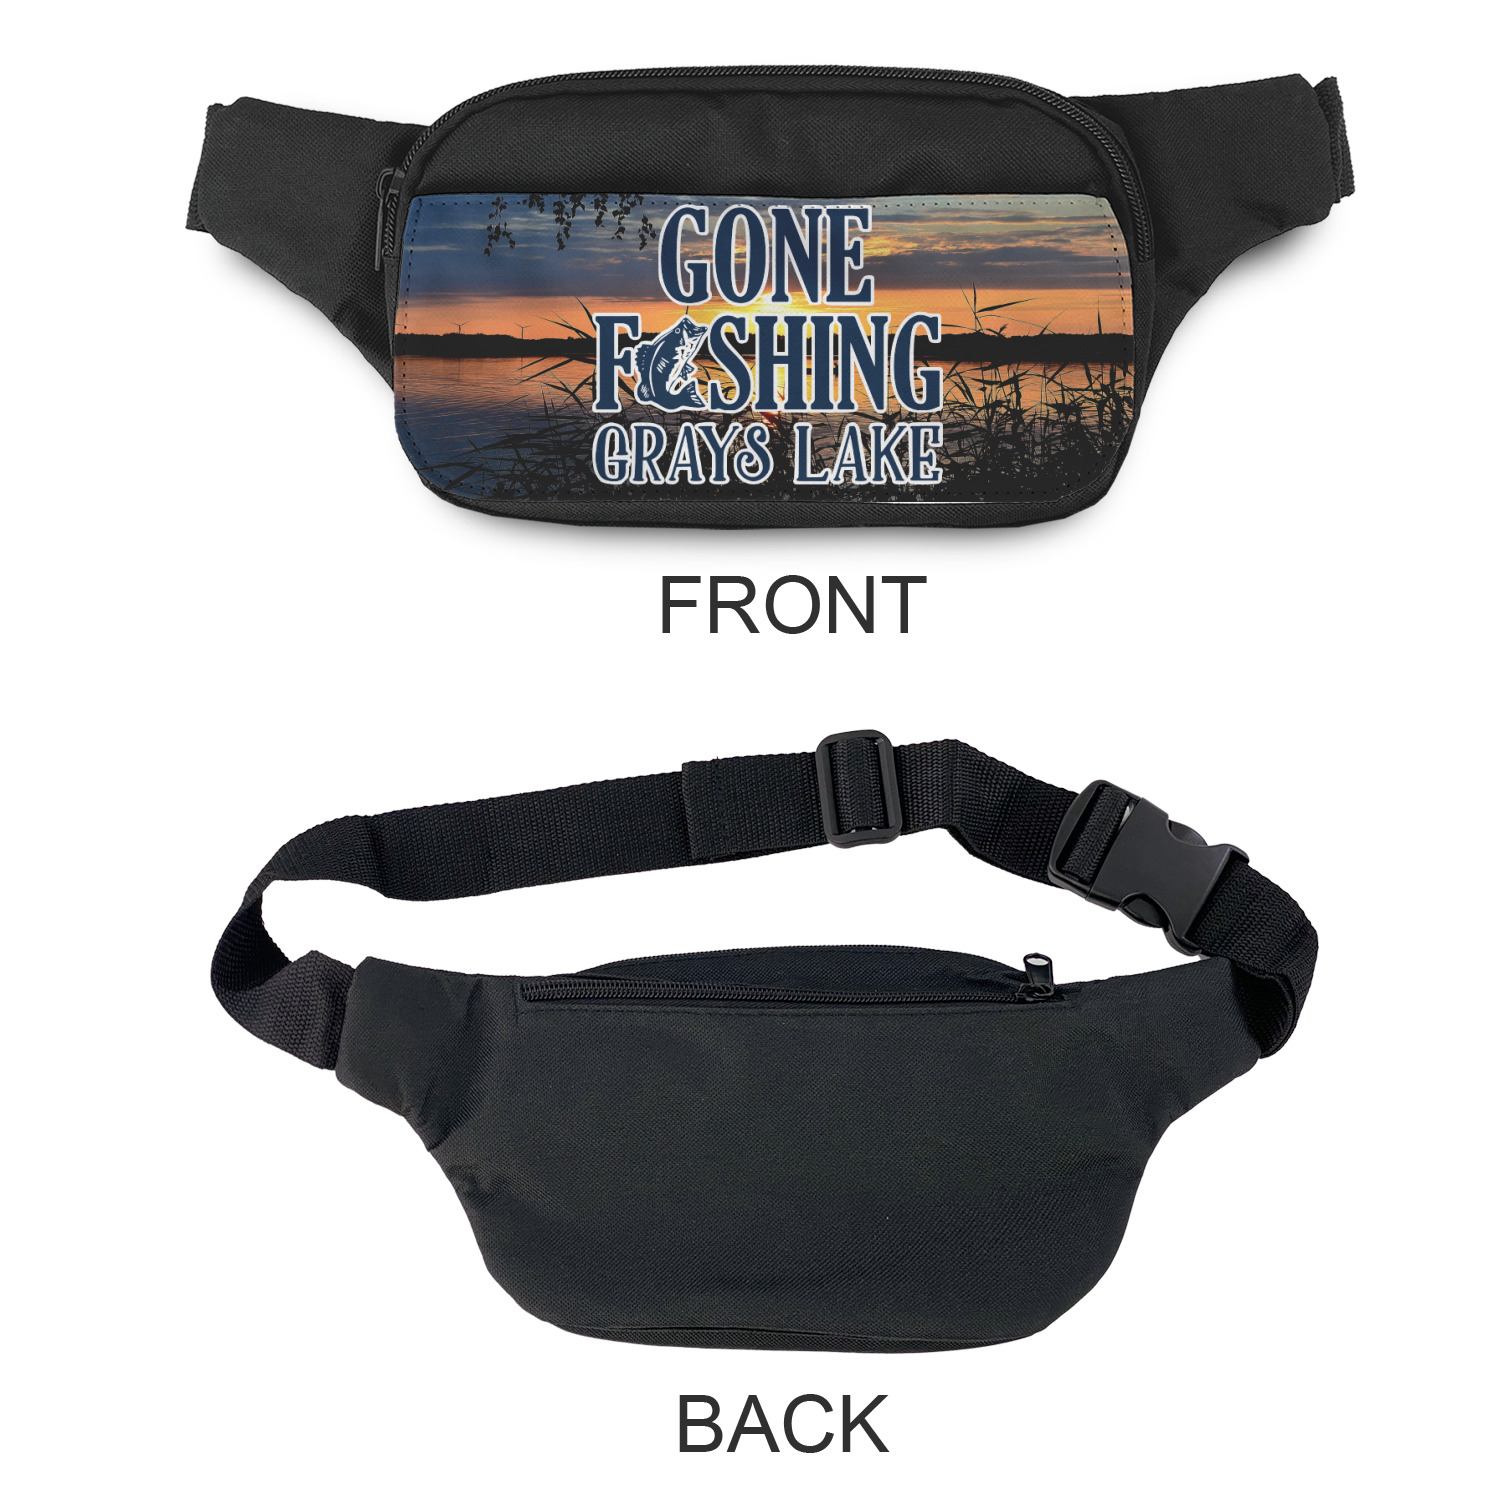 https://www.youcustomizeit.com/common/MAKE/1038229/Gone-Fishing-Fanny-Packs-APPROVAL.jpg?lm=1640280098